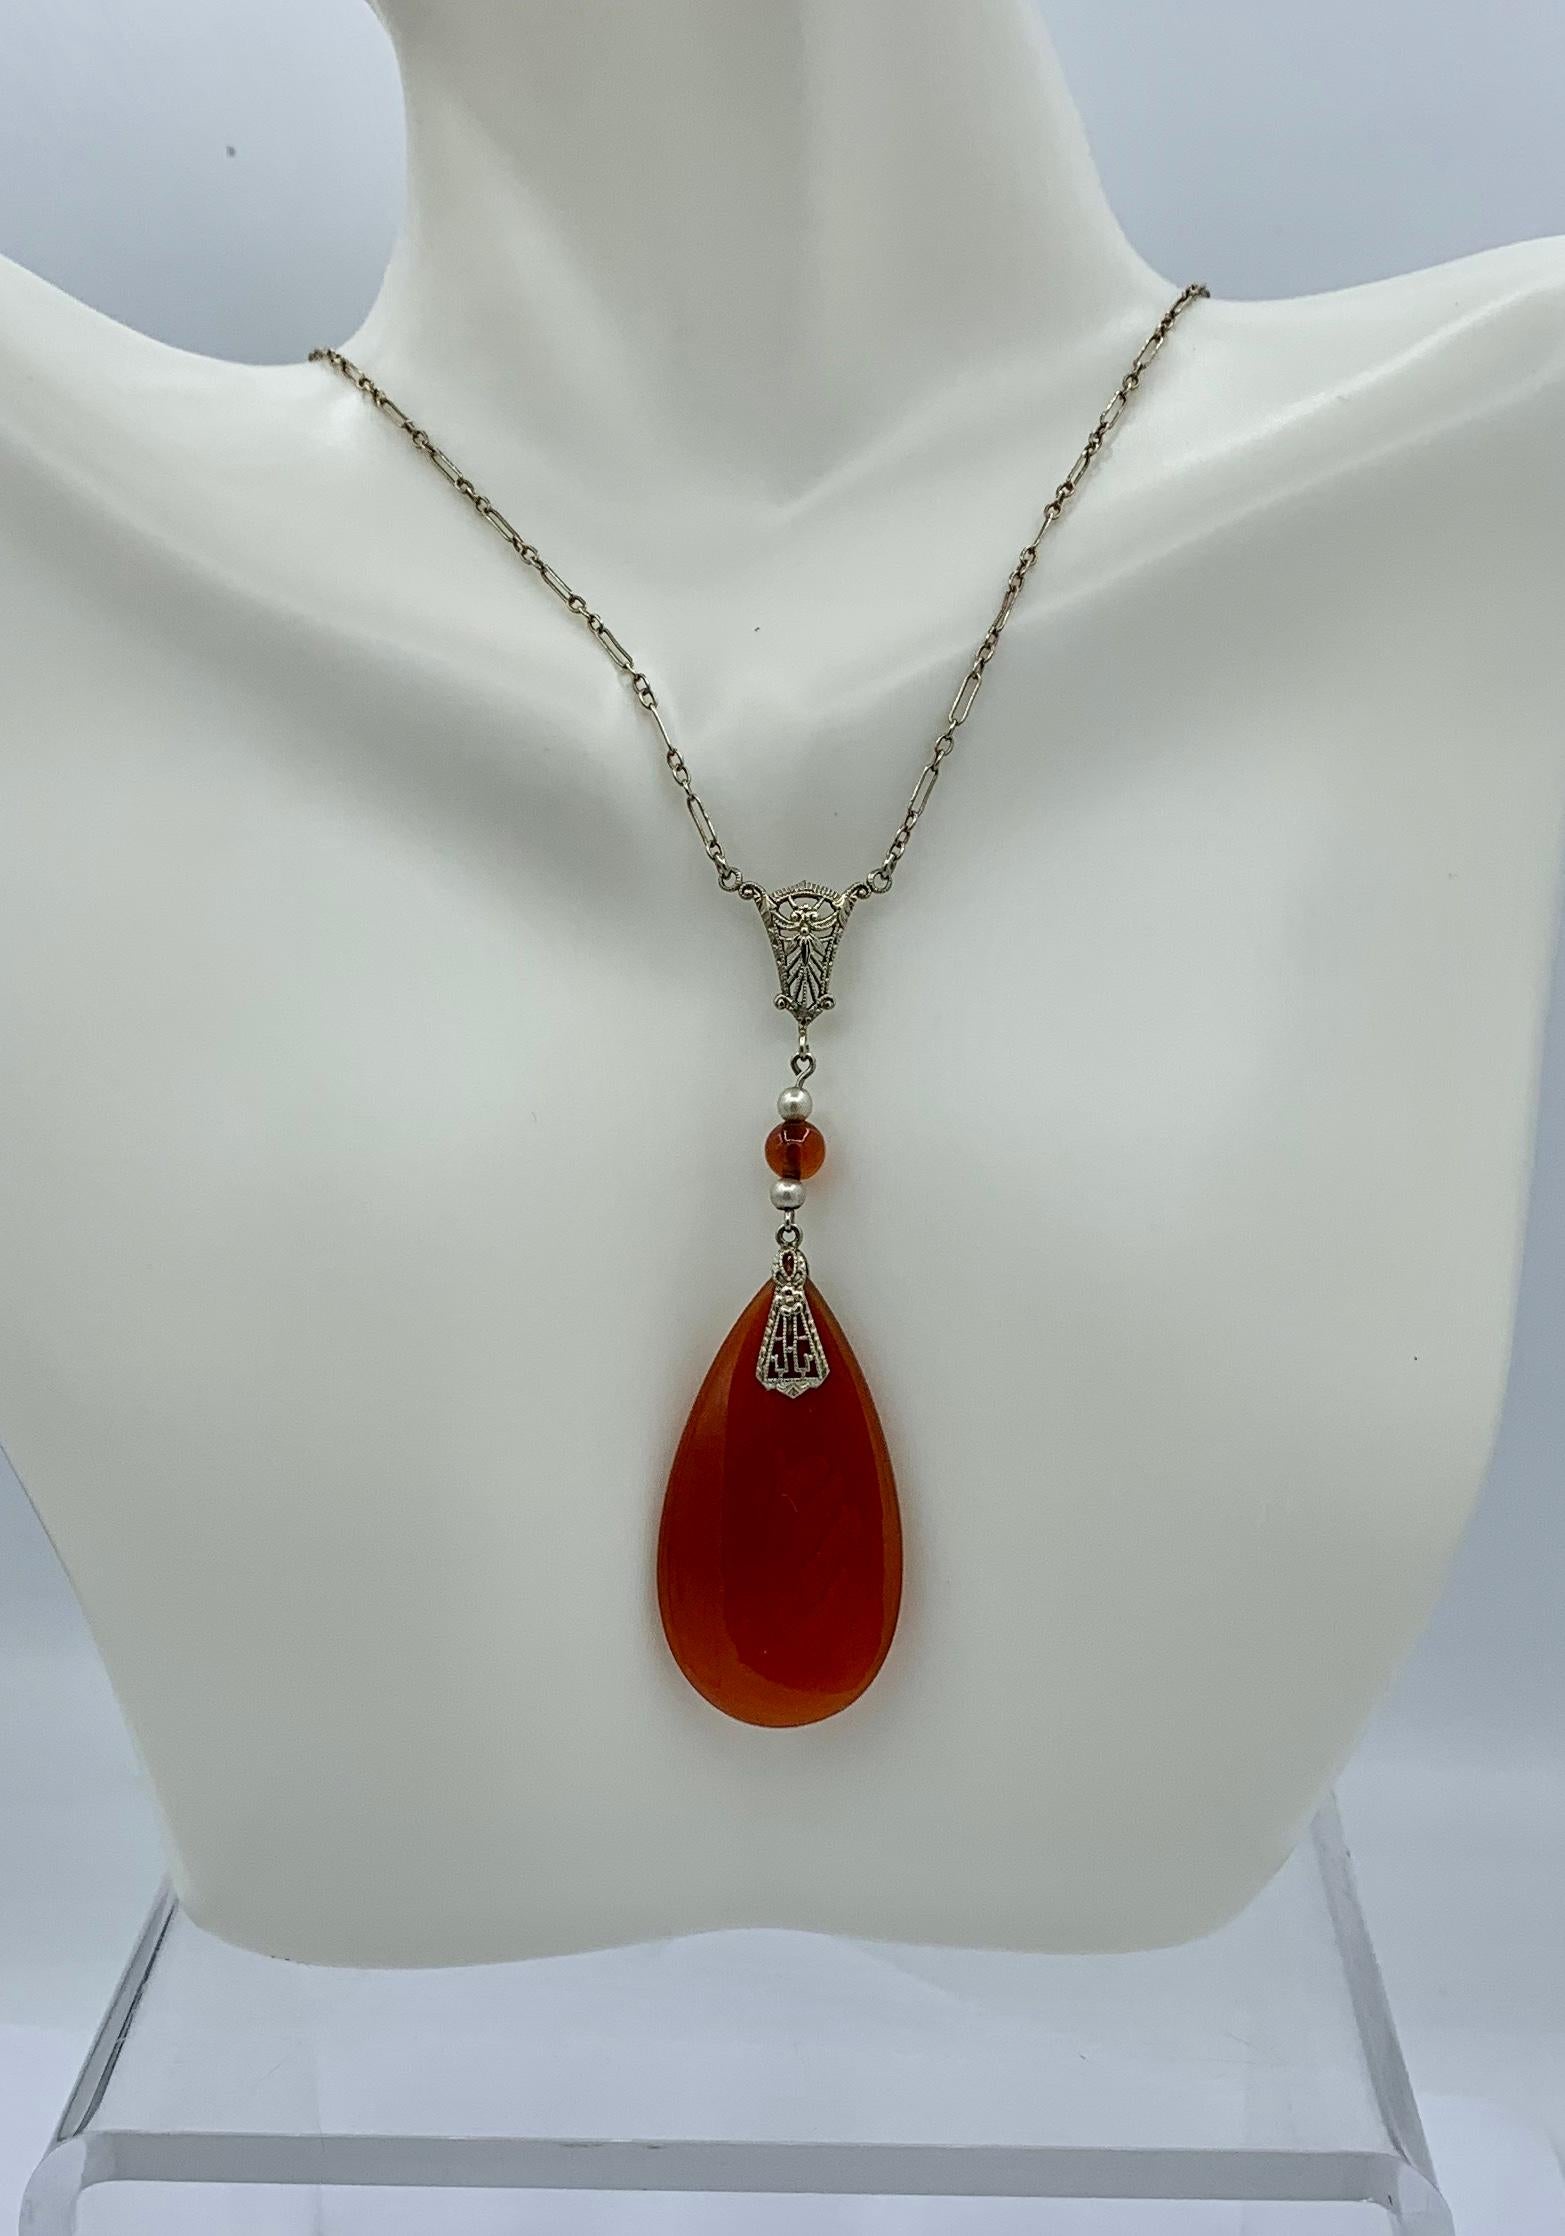 THIS IS AN EXTRAORDINARY ANTIQUE ART DECO JEWEL FROM A MAGNIFICENT NEW YORK ESTATE.  THE DRAMATIC NECKLACE IS OF NATURAL MINED CARNELIAN WITH A STUNNING CARNELIAN PENDANT AND PEARL AND CARNELIAN DROP WITH A FILIGREE DESIGN AND WONDERFUL CHAIN IN 14